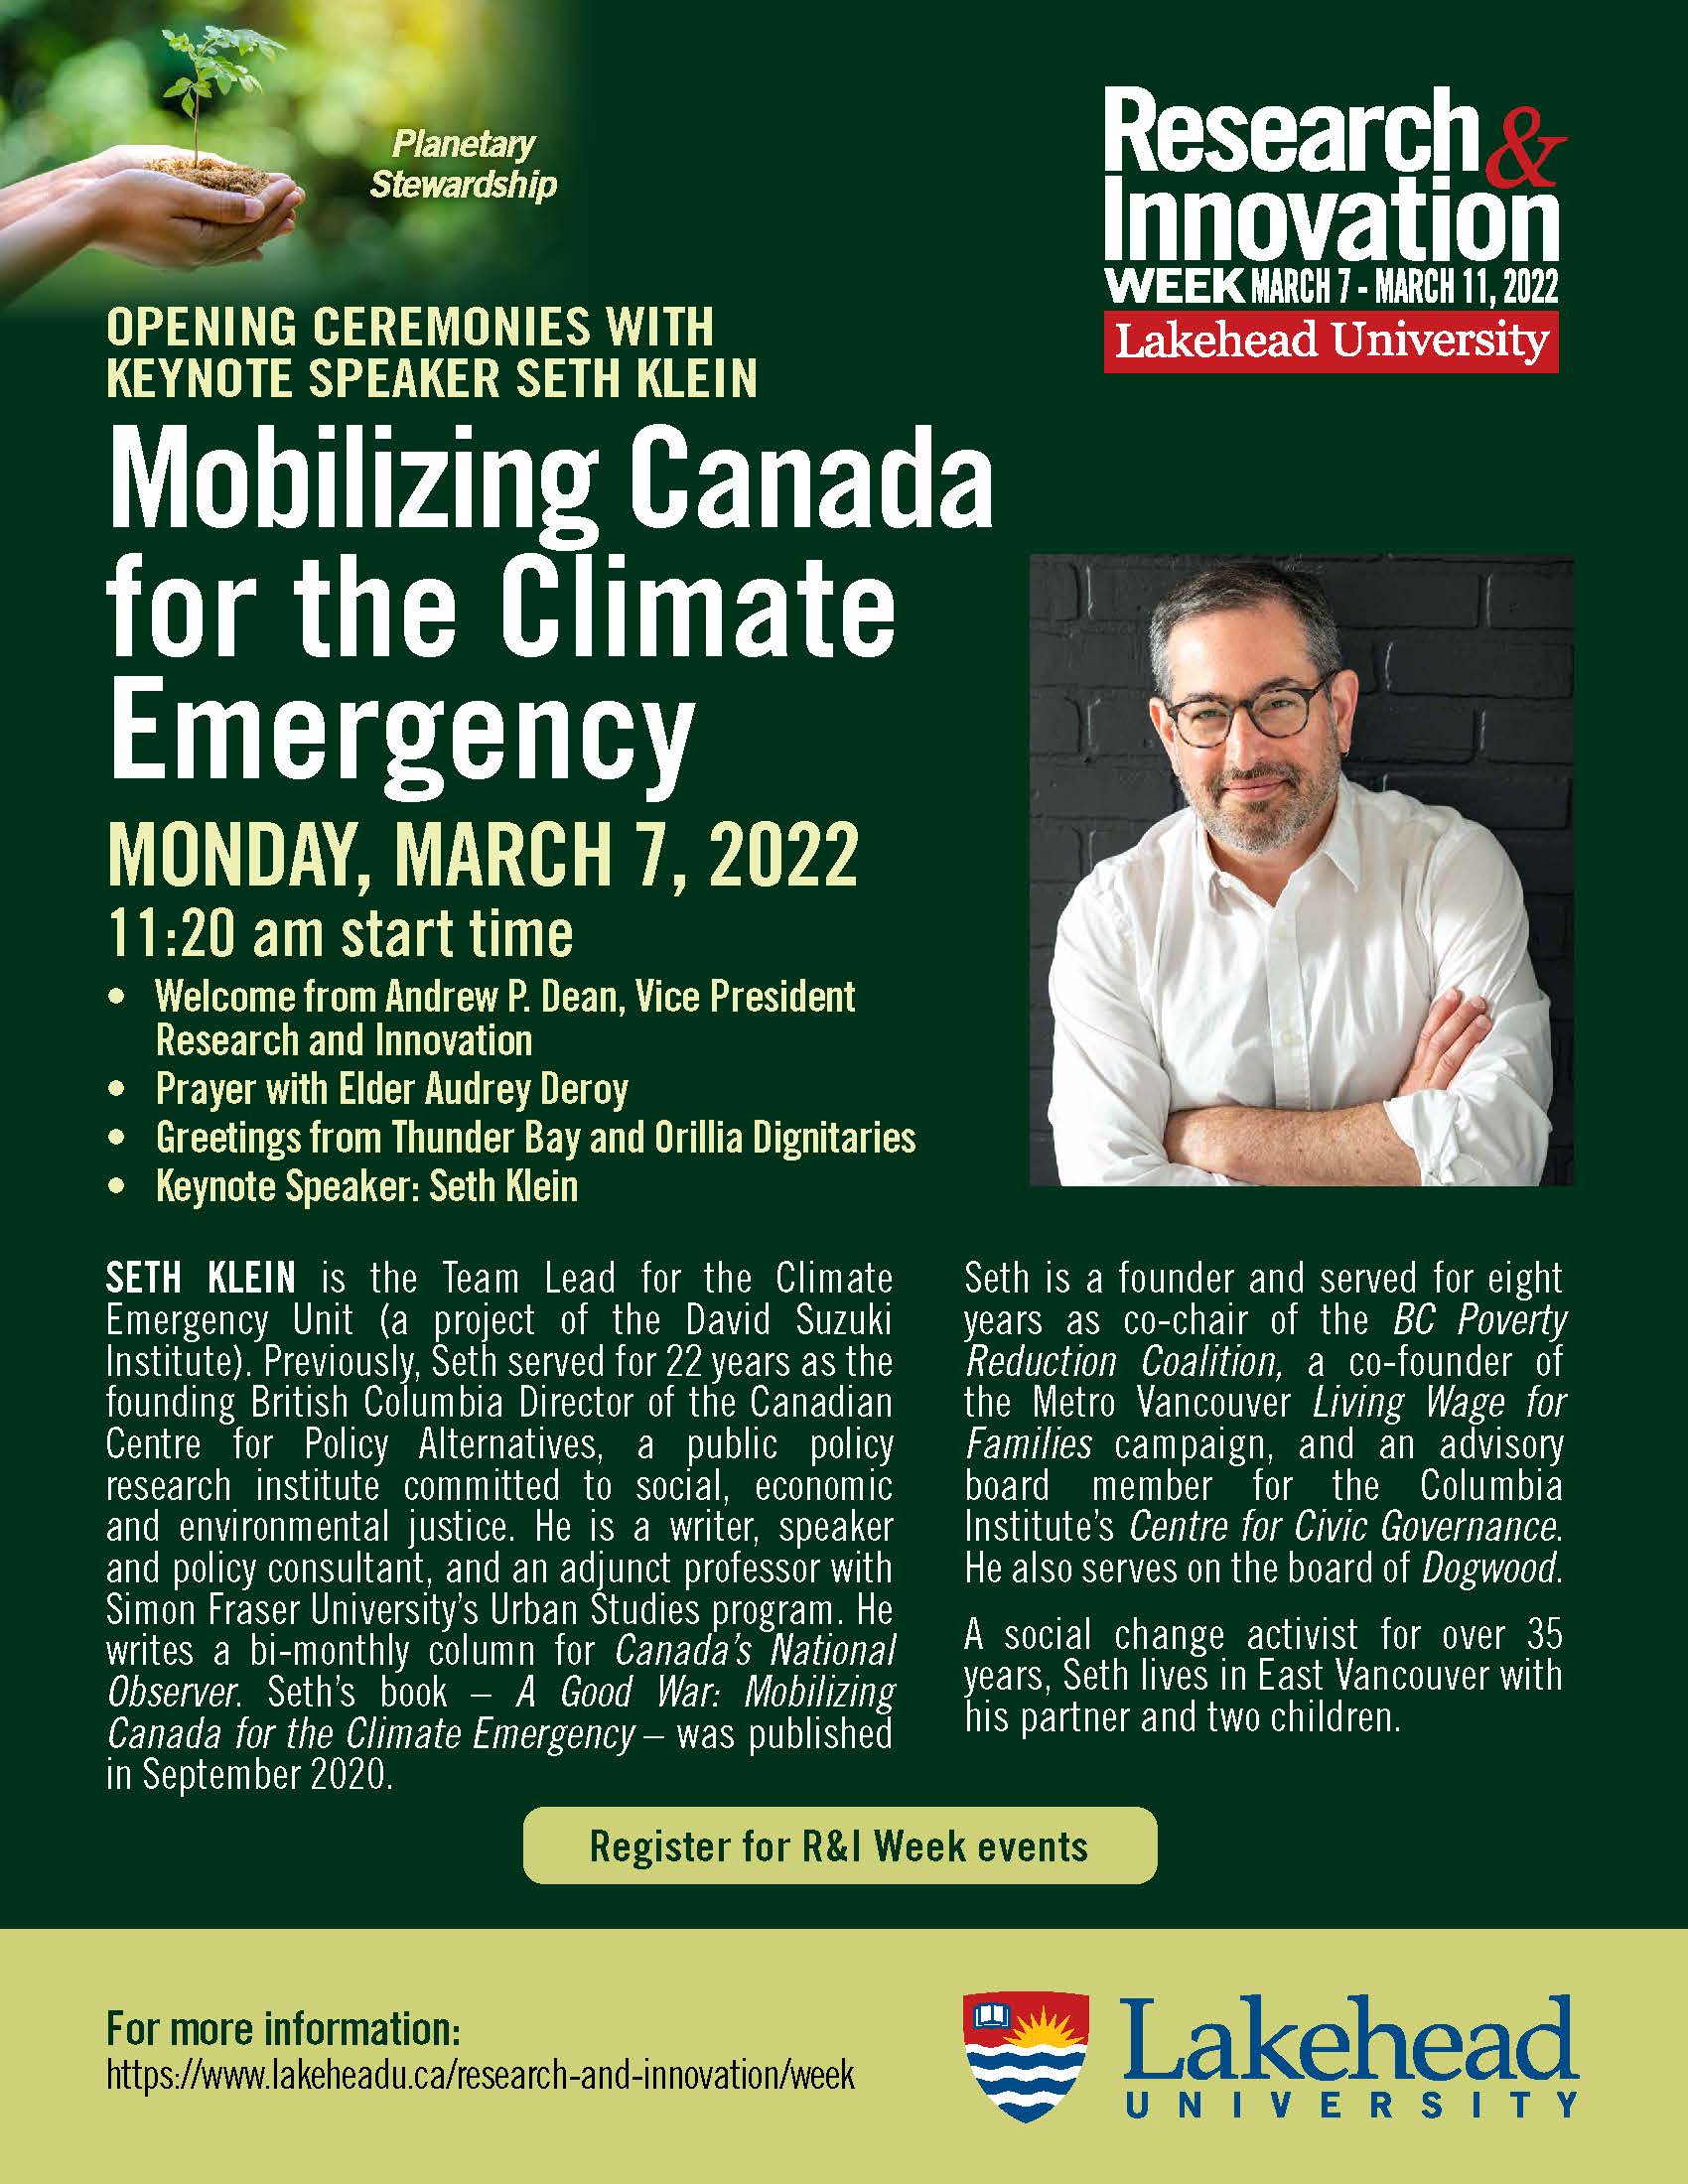 Poster for Opening Ceremonies with Keynote Speaker Seth Klein "Mobilizing Canada for the Climate Emergency"